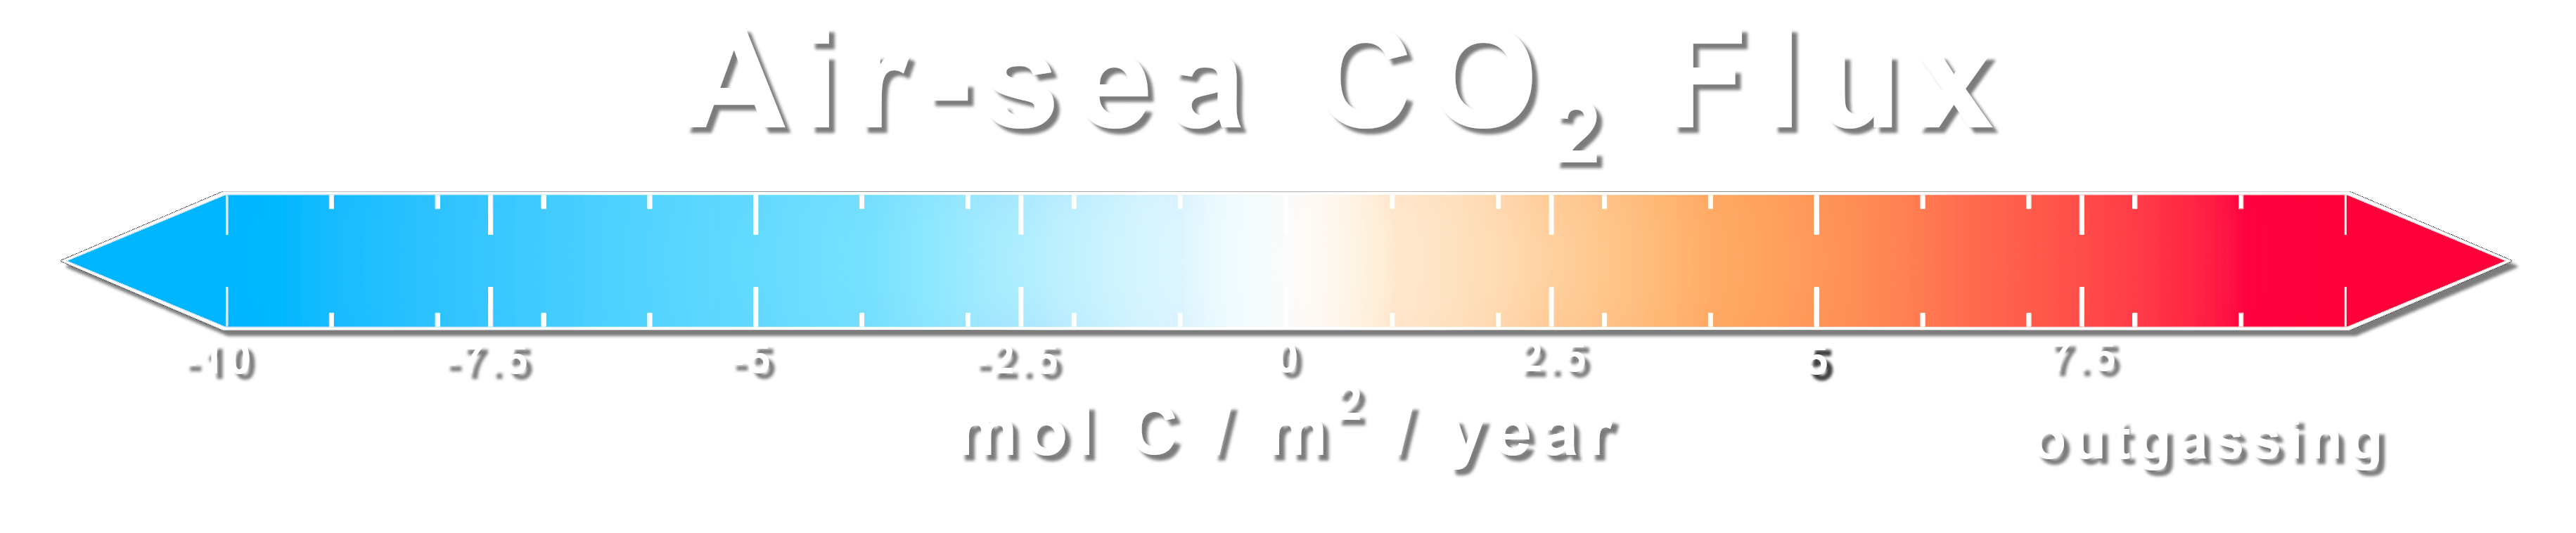 Air-sea CO<sub>2</sub> flux colorbar ranging from -10 (cyan) to 0 (gray) to 10 (red) in mol C/m<sup>2</sup>/year.